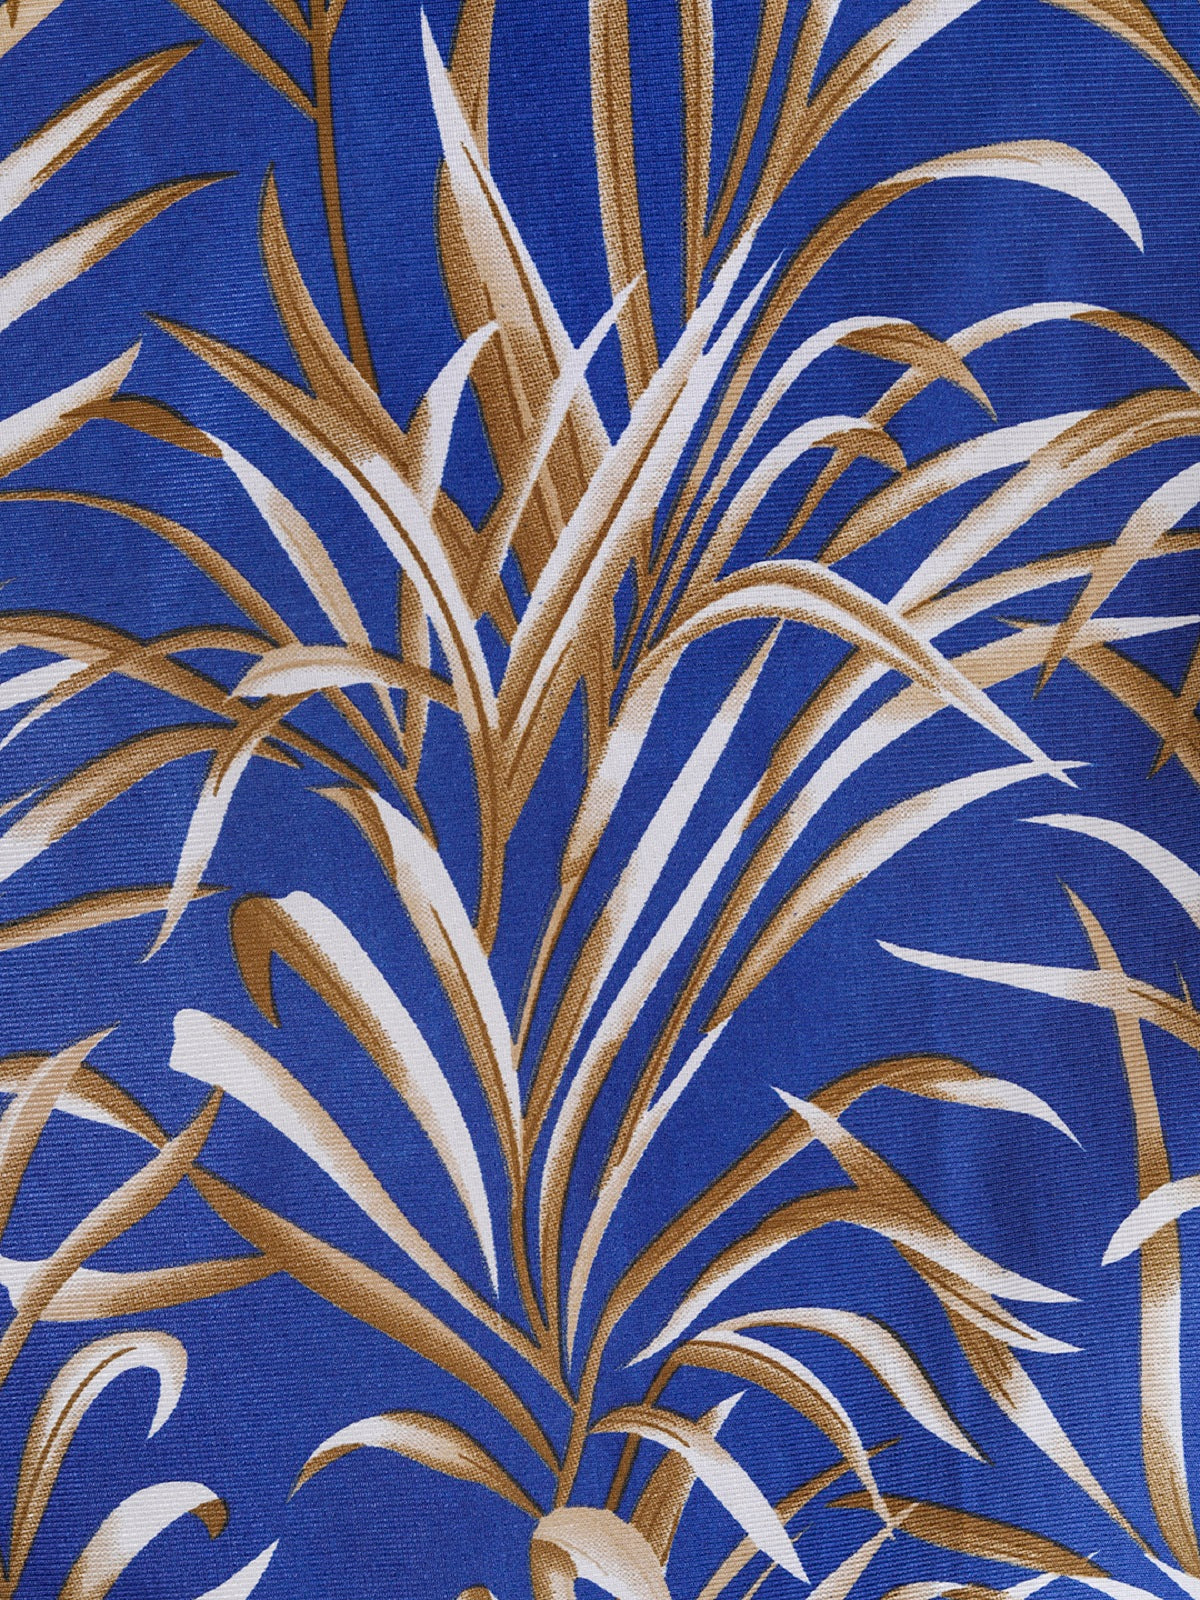 Romee Royal Blue Leafy Patterned Set of 2 Door Curtains